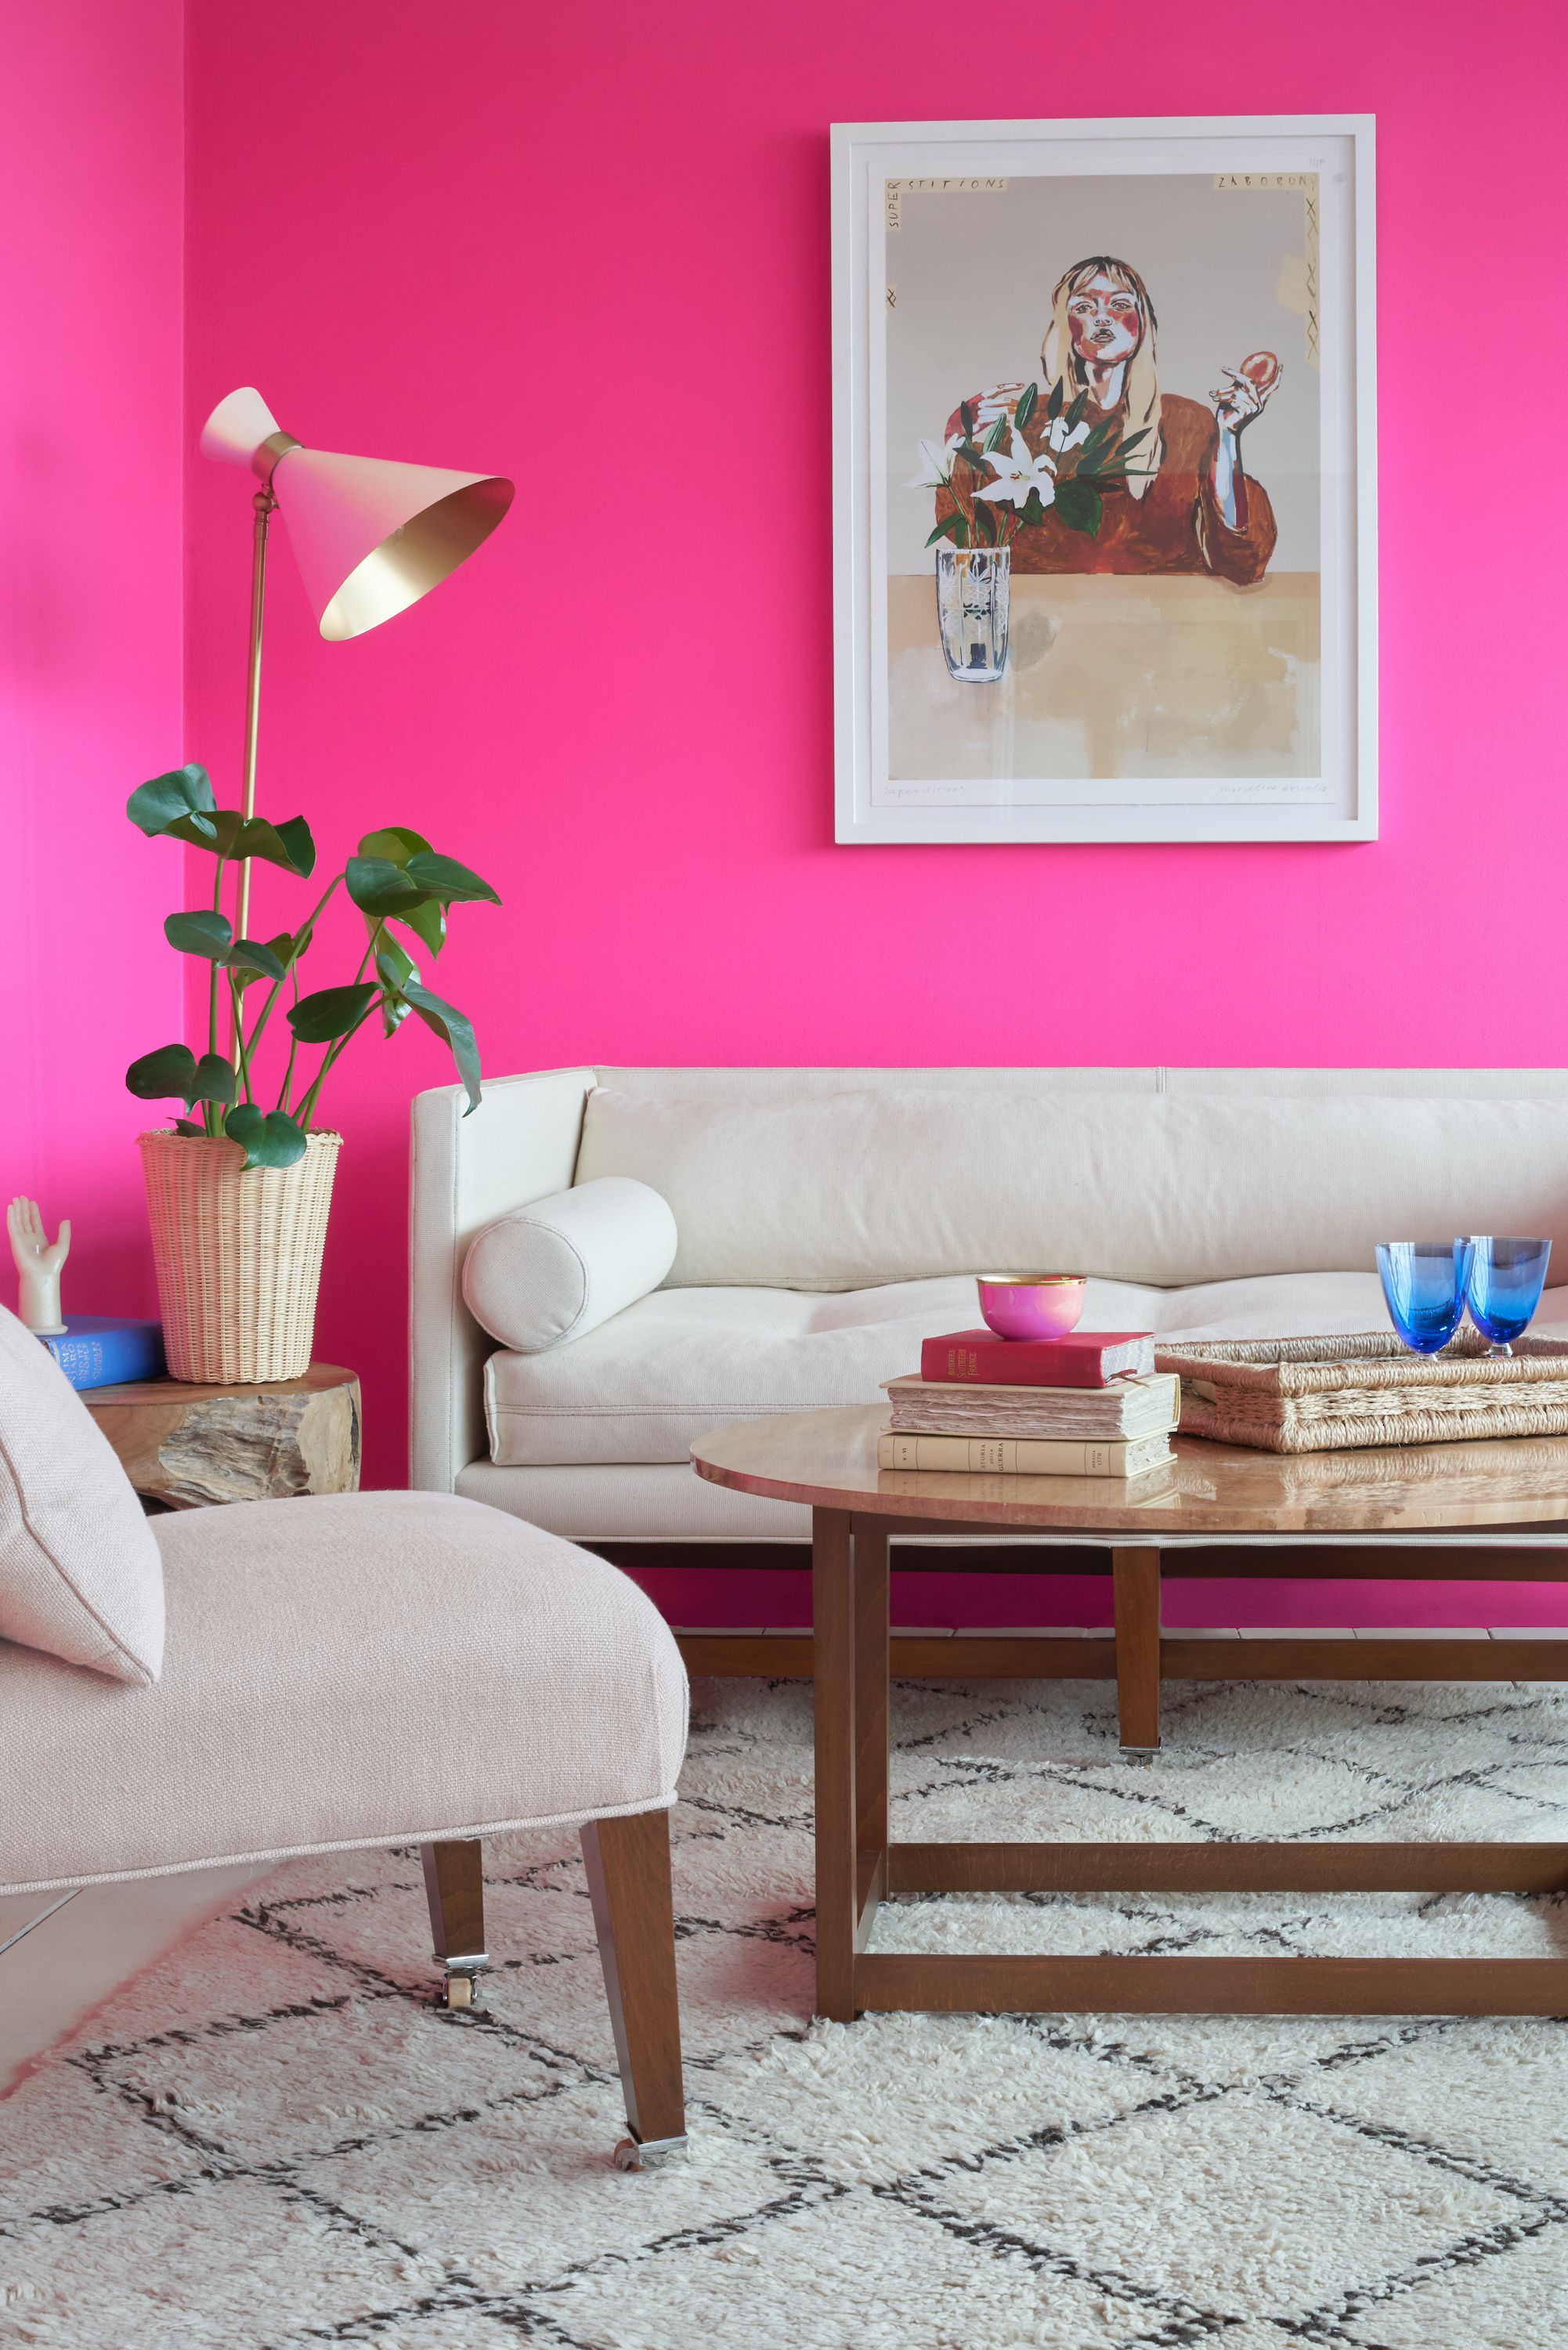 Barbiecore-inspired hot pink (FTT-006) is Mylands' Colour of the Year for 2023